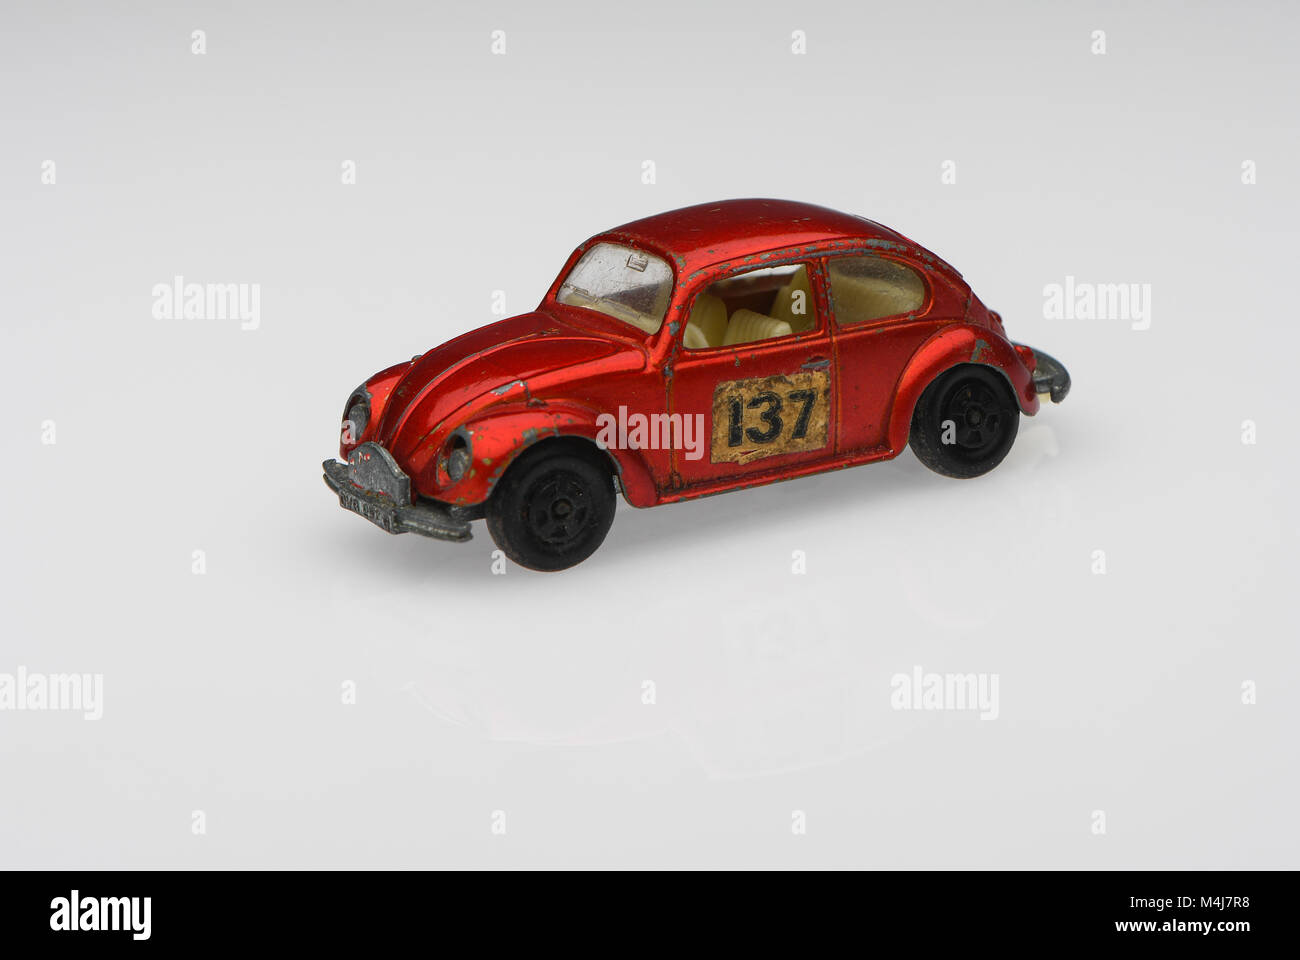 A red vintage 1500 saloon Volkswagen beetle toy race car car showing signs of use on a white background. Stock Photo